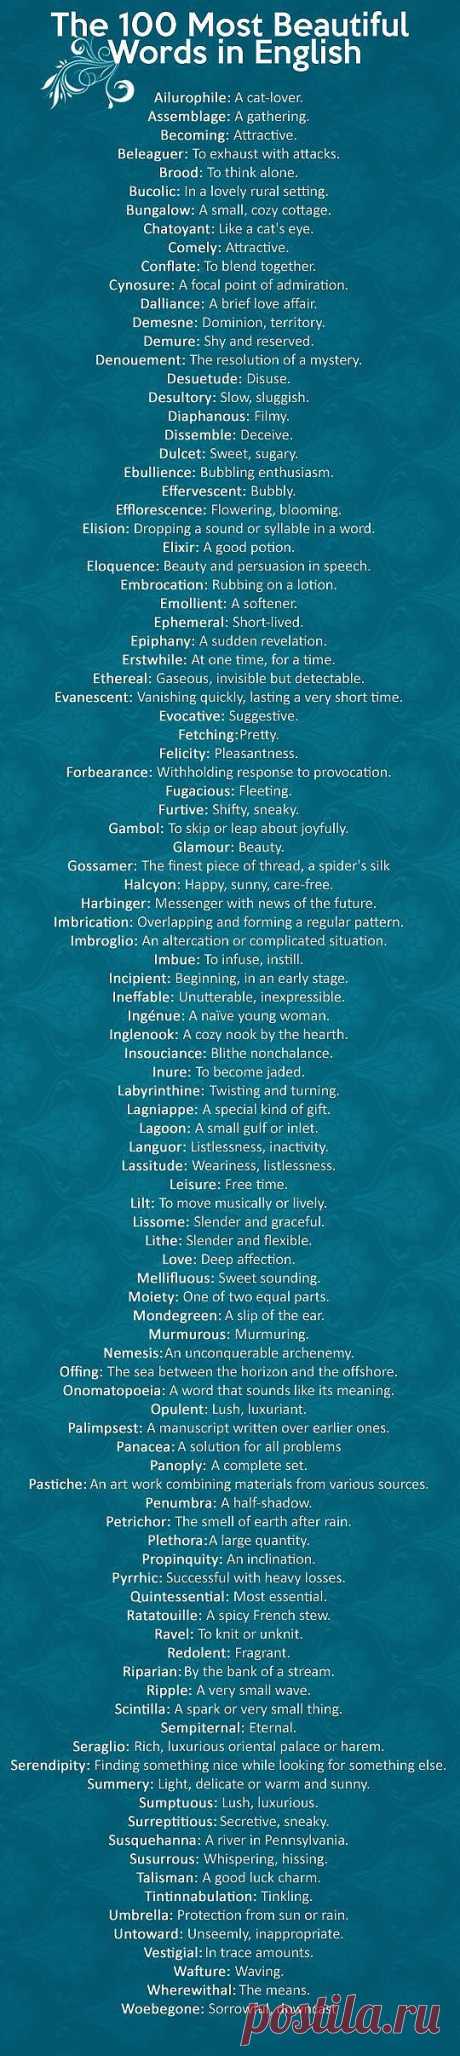 The 100 Most Beautiful Words in English